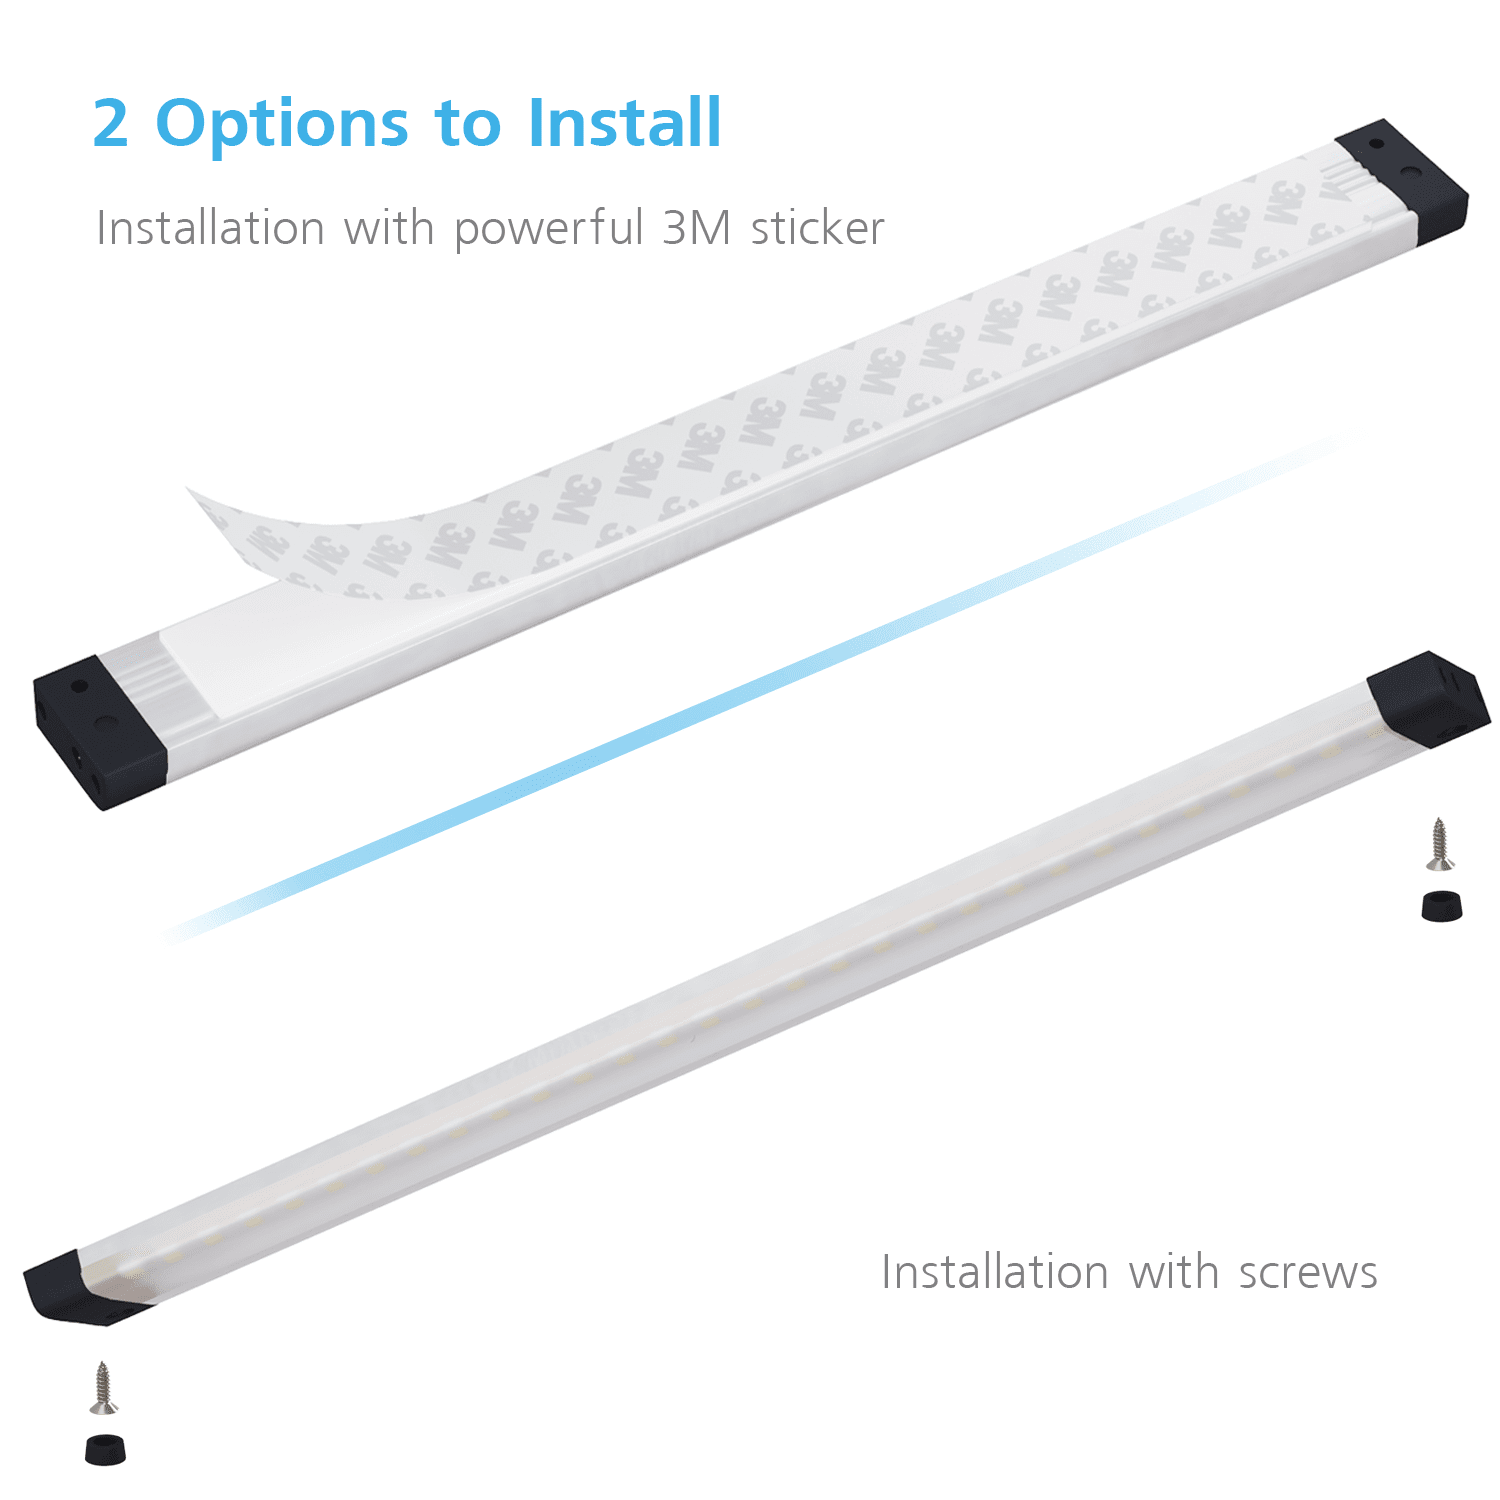 EShine 3 Extra Long 20 inch Panels LED Dimmable Under Cabinet Lighting Kit Hand Wave Activated Warm White Touchless Dimming Control 3000K 